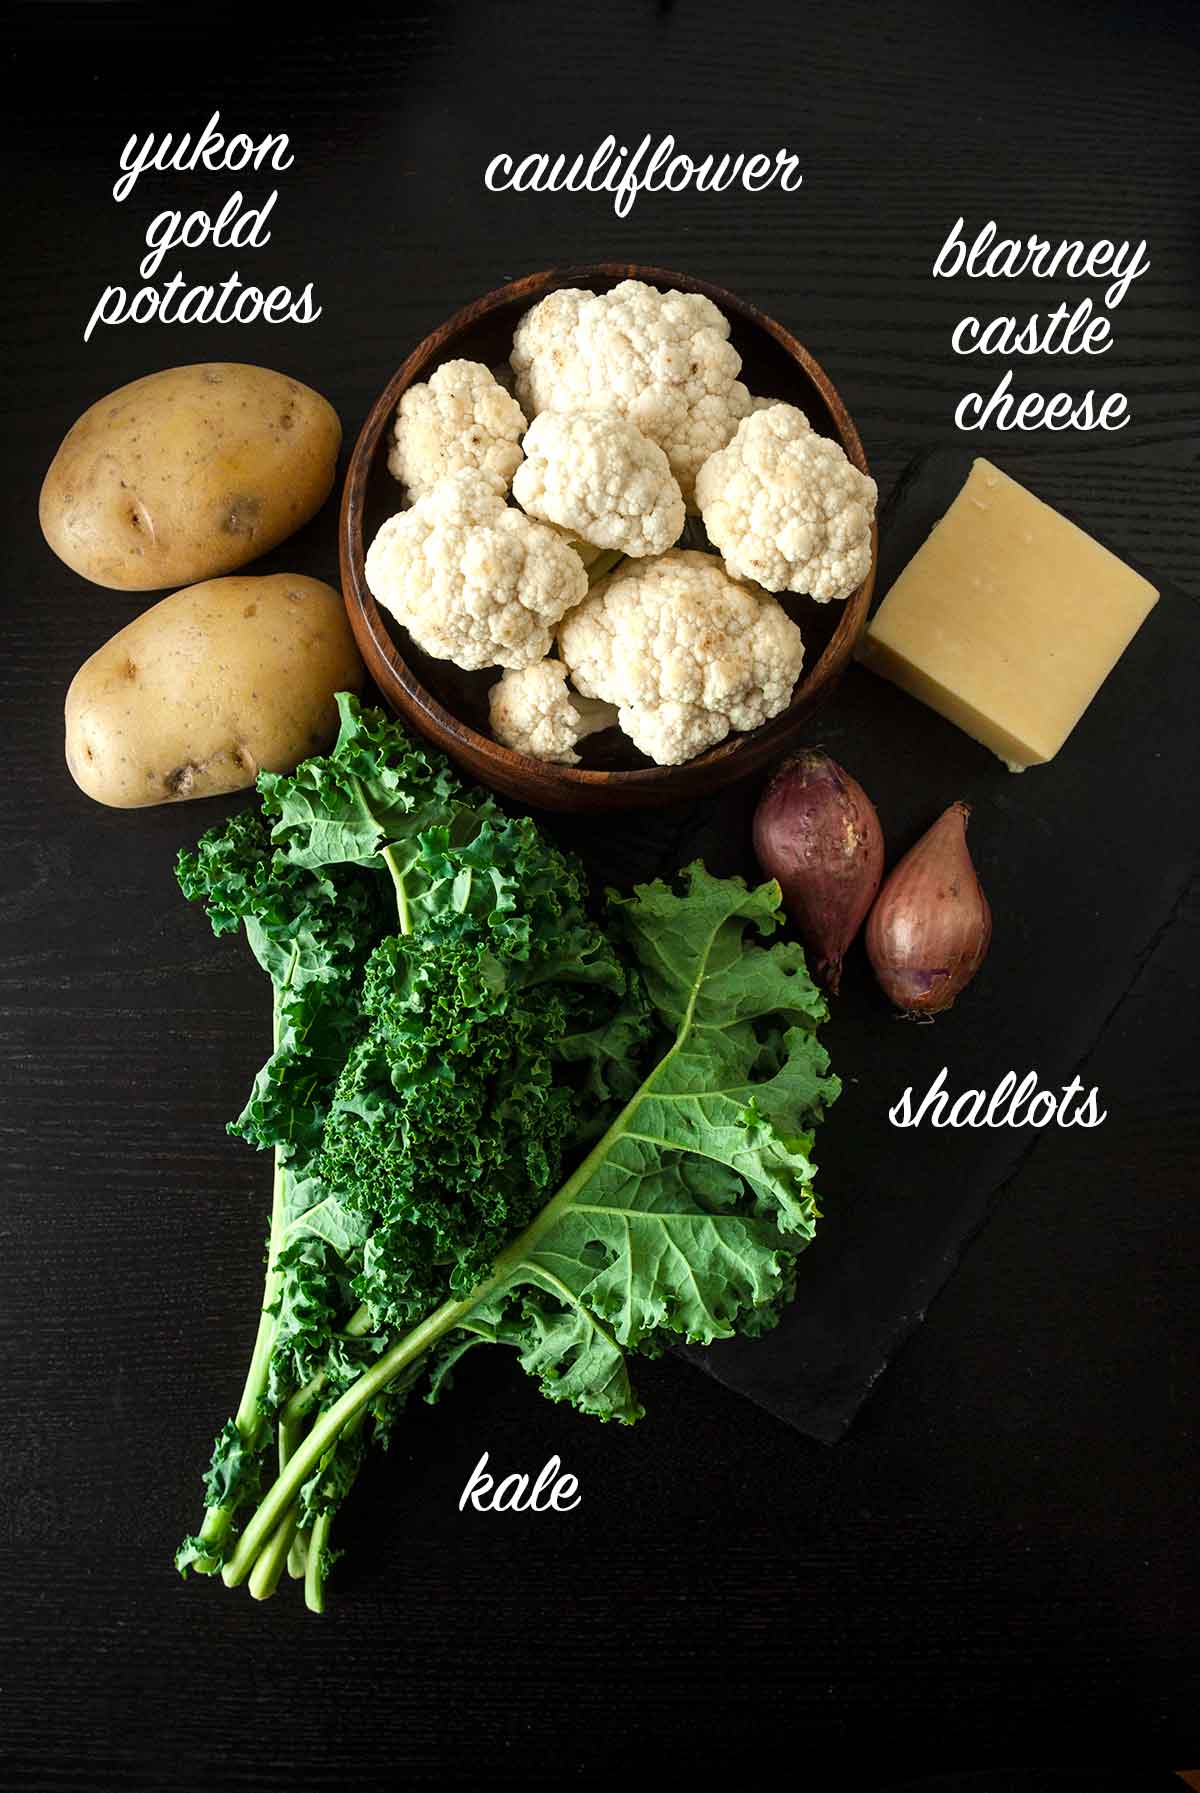 A group of ingredients on a black table with text labels.